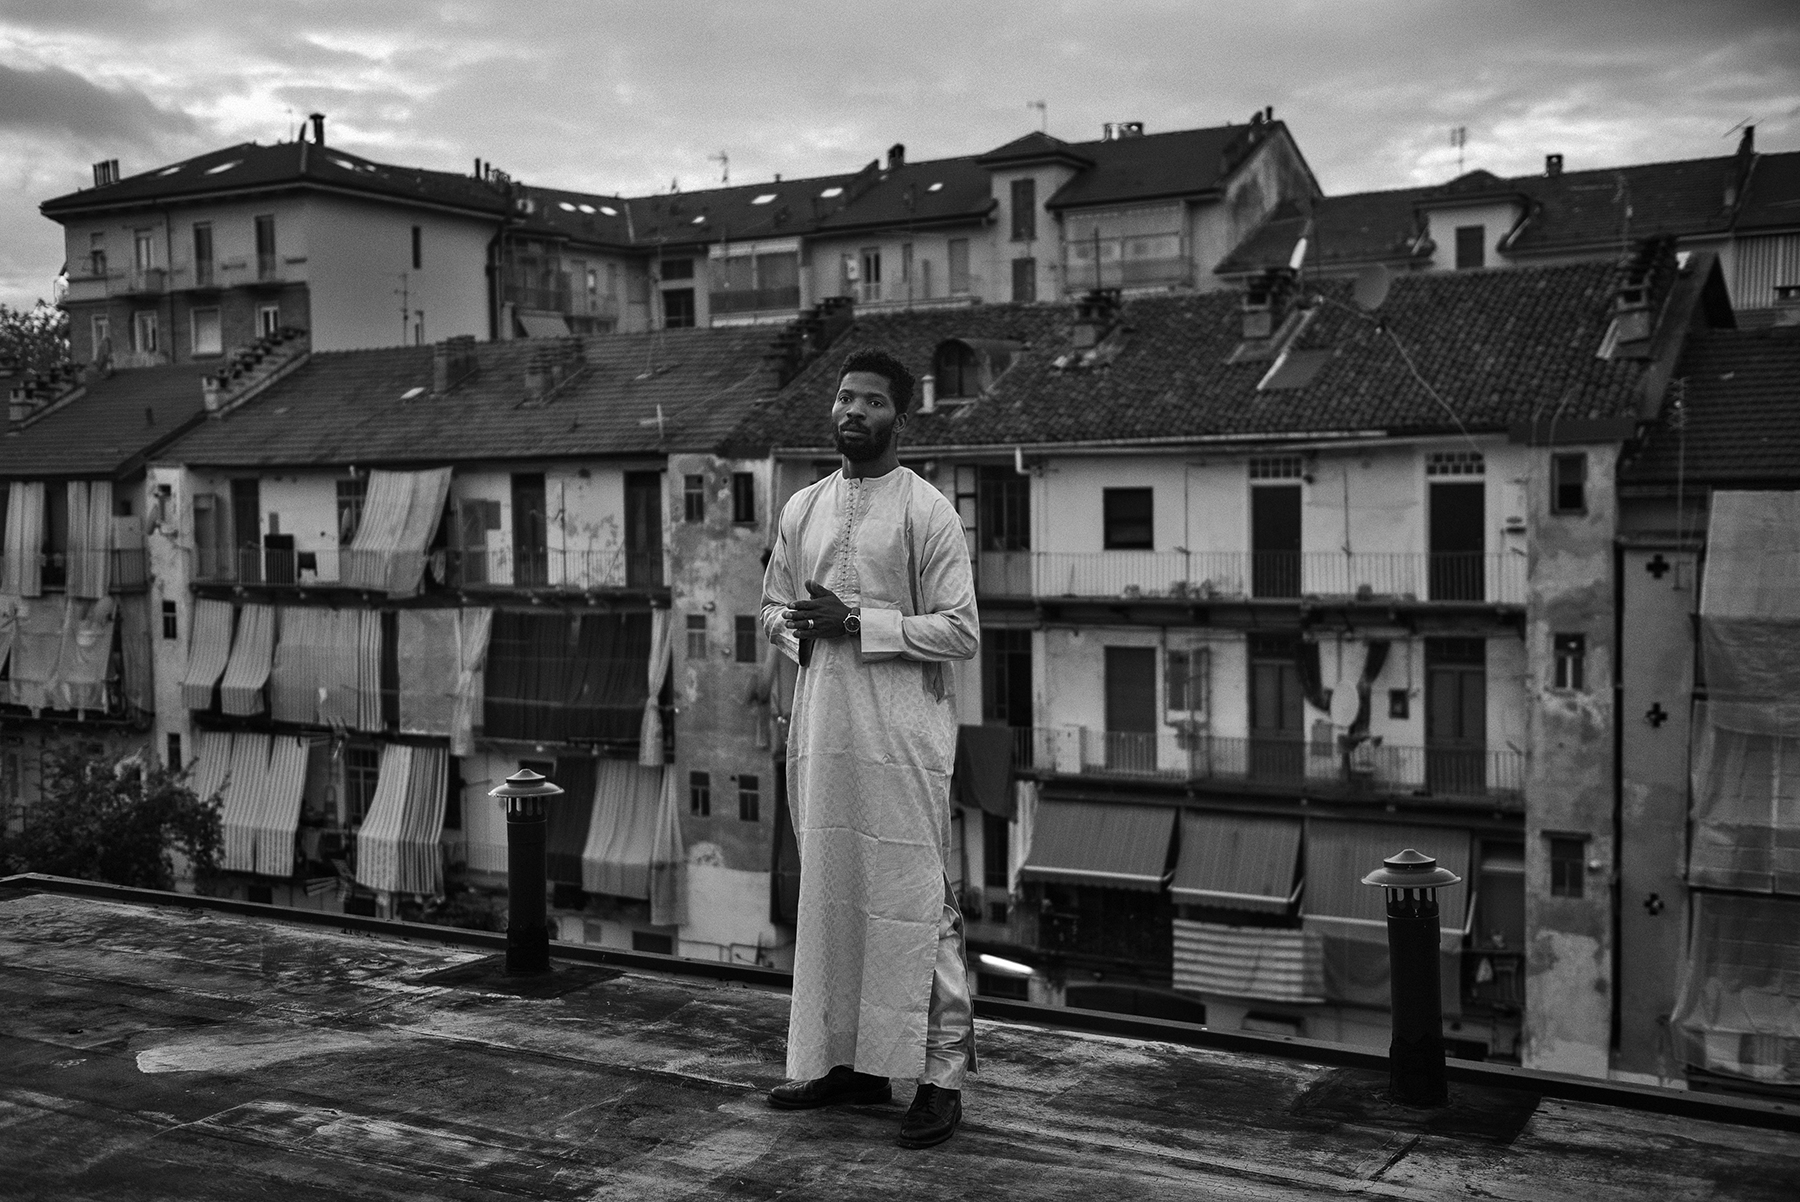  Jacob Bamba (30) portrayed in the rooftop of the Public Baths of Via Agliè in the working-class district of Barriera di Milano in Turin, Italy; November 2018.
Mr. Bamba - who arrived in Turin when he was 18 - has lived for 2 years in a small apartme